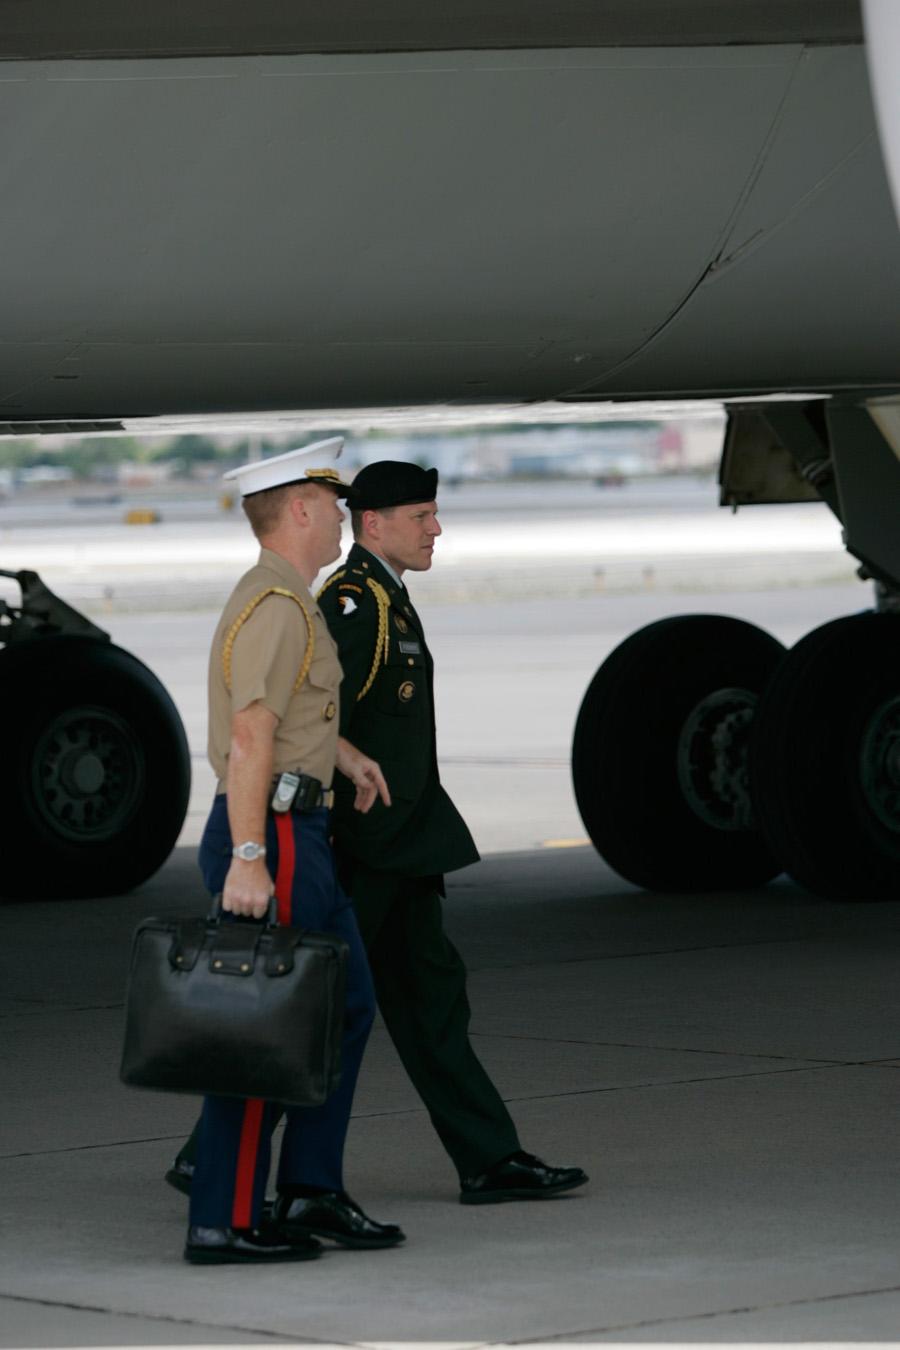 President Bush arrives at Reno/Tahoe International Airport, 18 June 2004, with Military Aide Major Christian Cabaniss carrying the Football and Military Aide Steve Fischer standing to his right